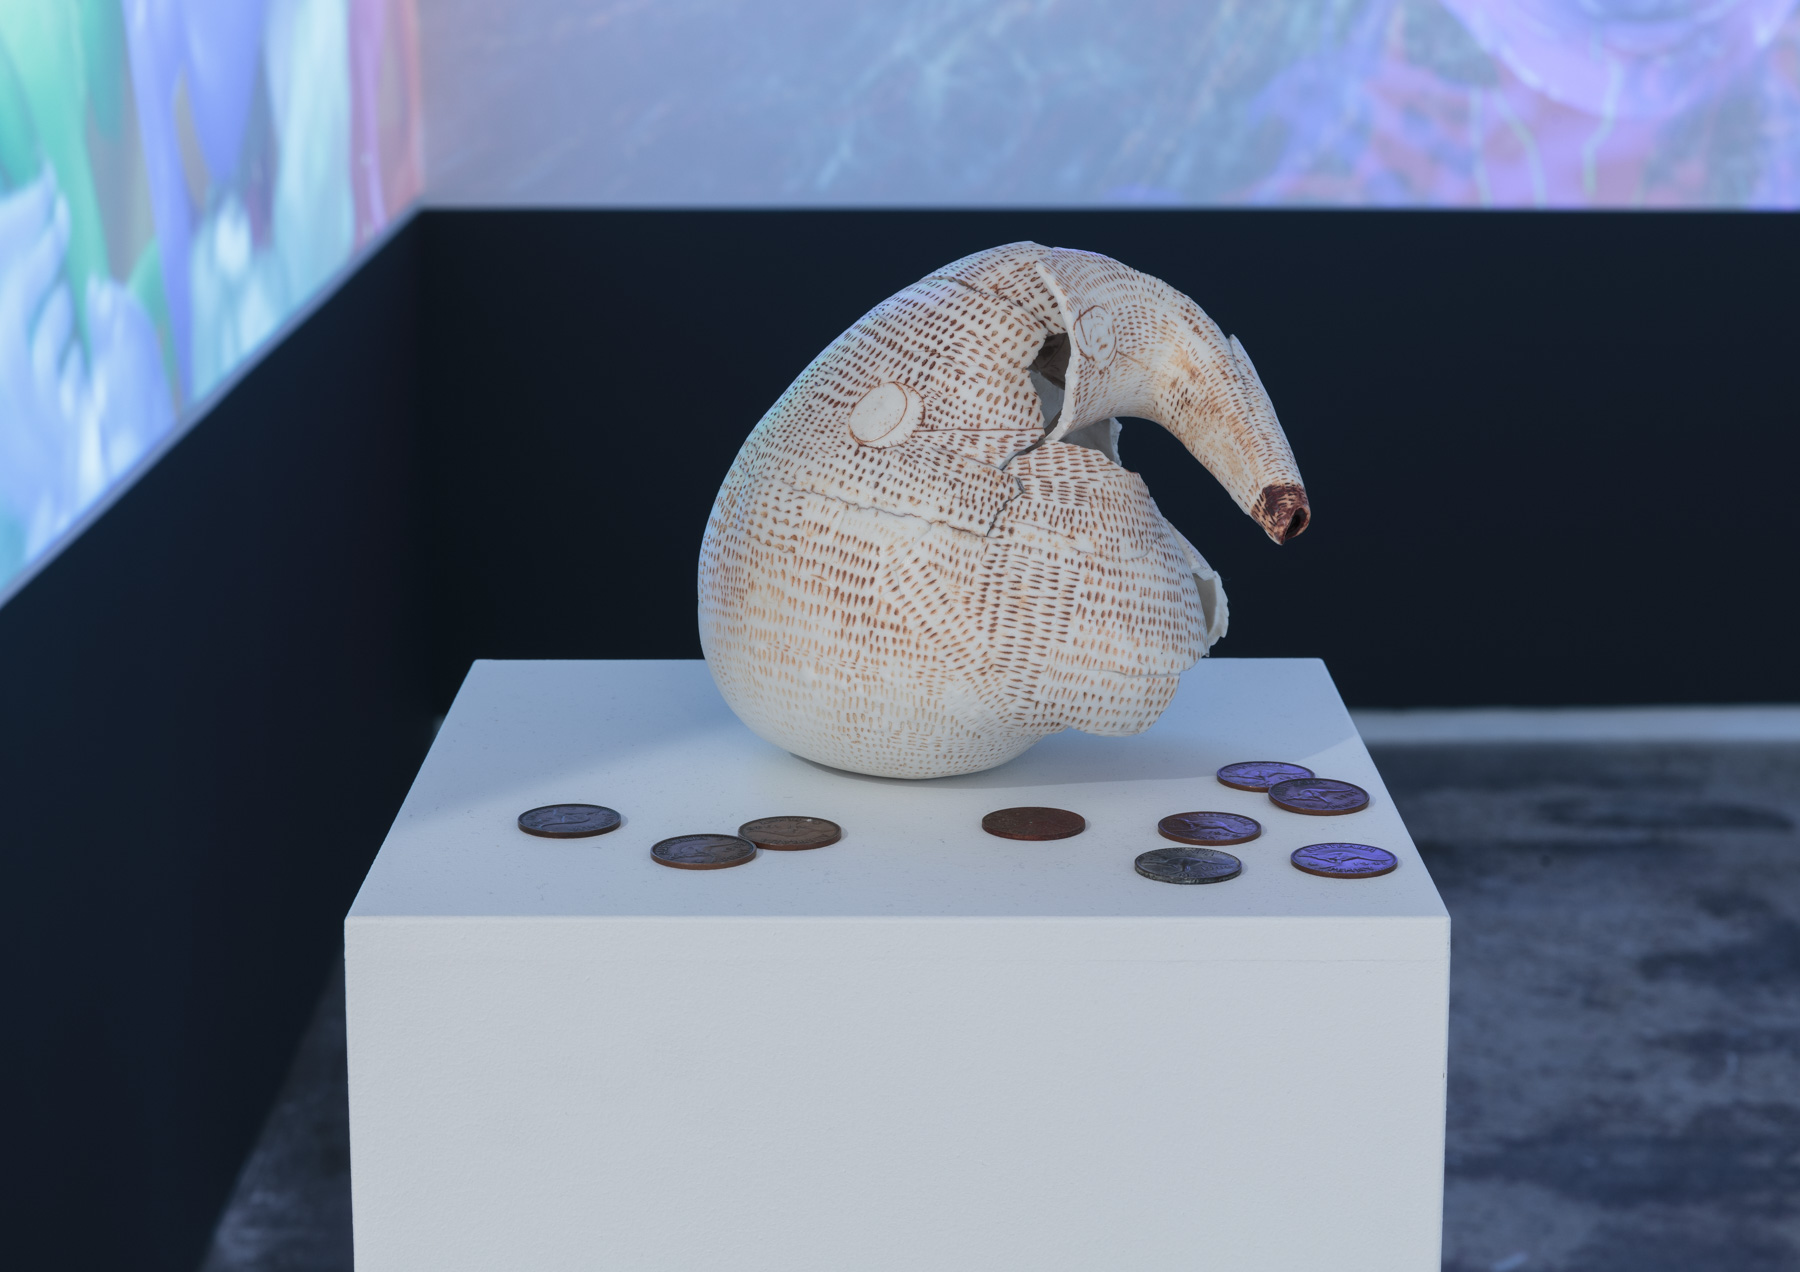 alembic sculpture, her eyes were as black as coal, sound, video and sculptural installation by virginia barratt and francesca da rimini, hudson gallery, new york, 2019